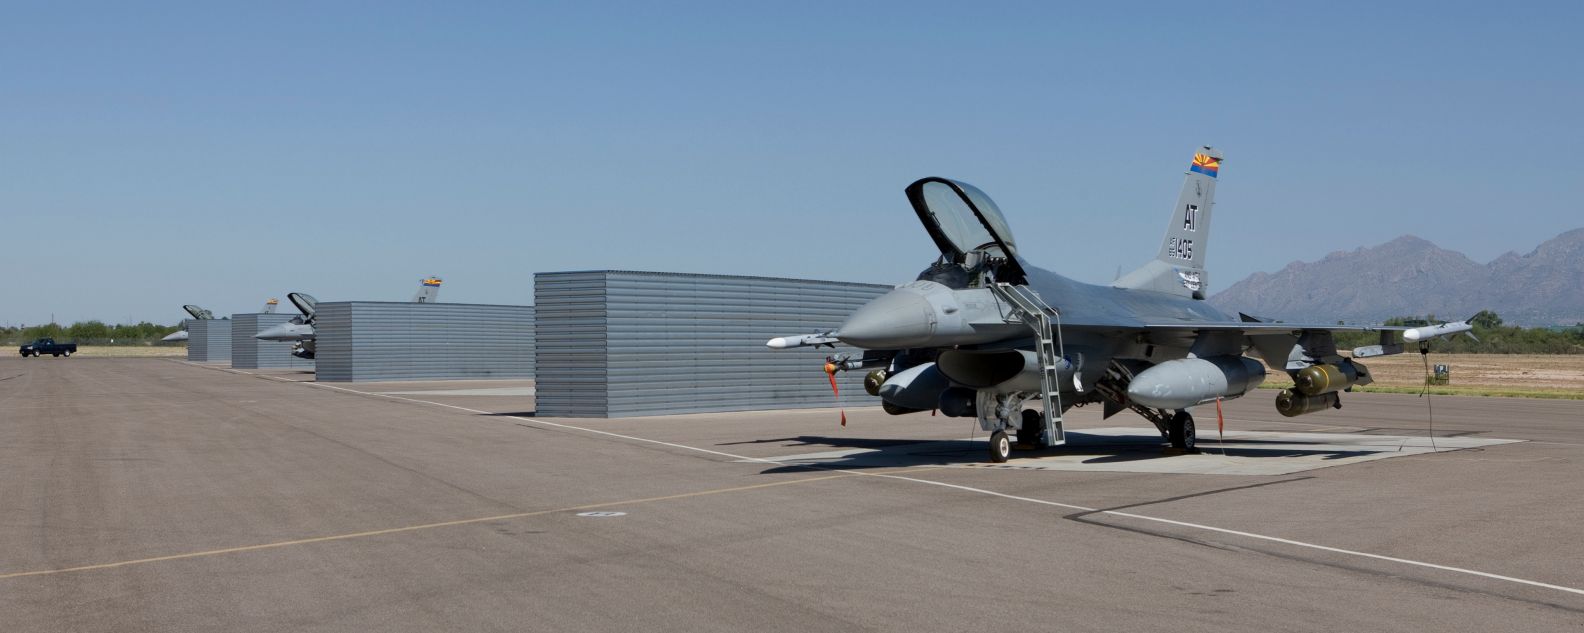 Three F-16's from the Air National Guard Air Force Reserve Test Center sit in the revetments at Davis-Monthan Air Force Base prior to a test mission